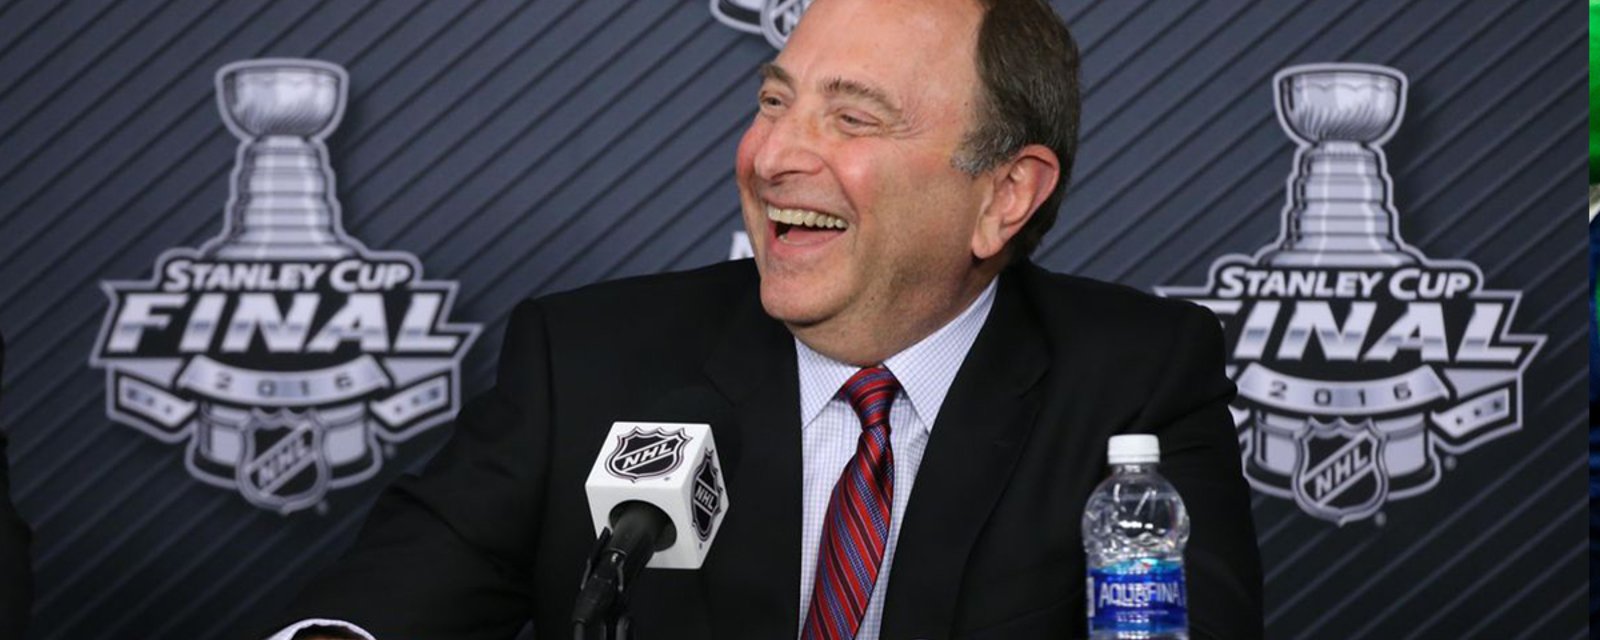 Report: Bettman makes controversial comments on rule changes for playoff OT